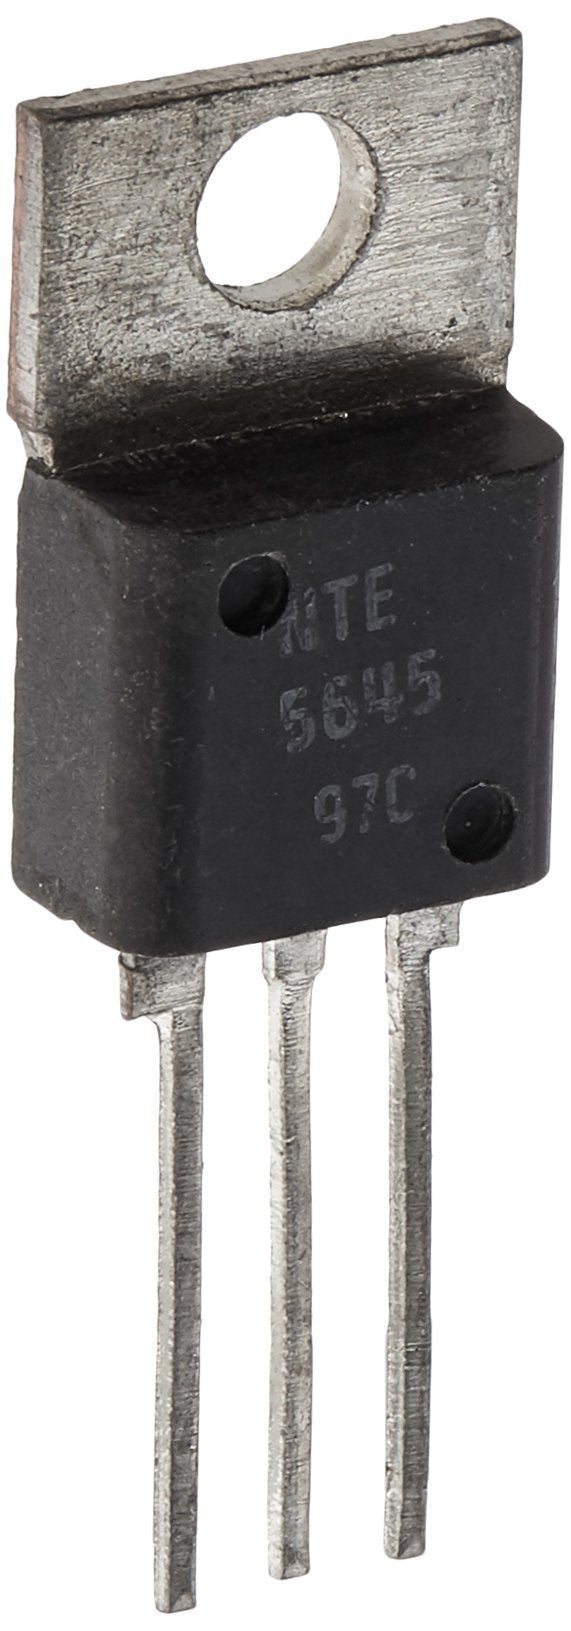 NTE Electronics NTE5645 Triac, TO-220 Isolated Package, 10 Amp, 600V